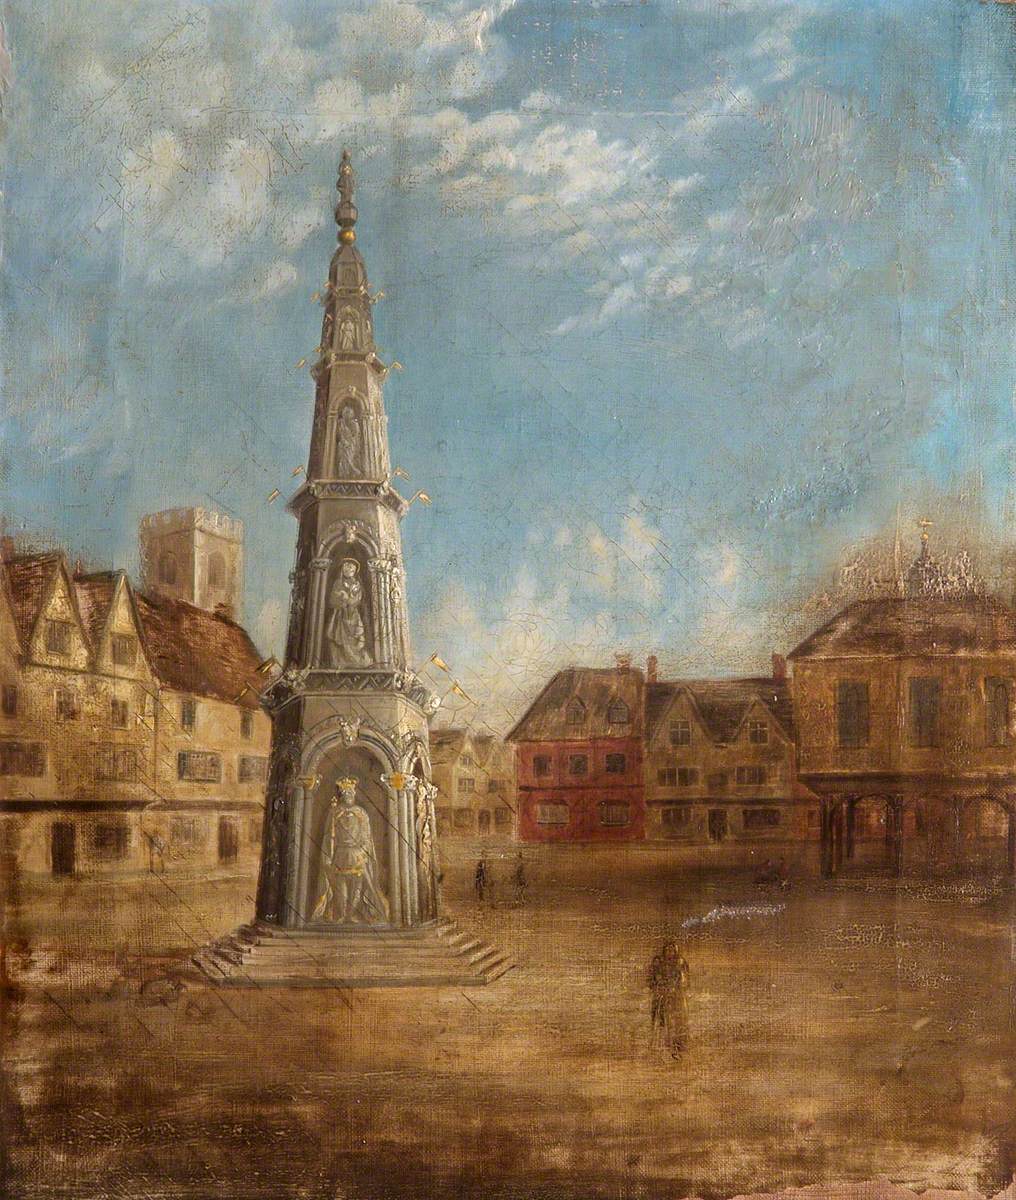 Abingdon Cross and Market Place